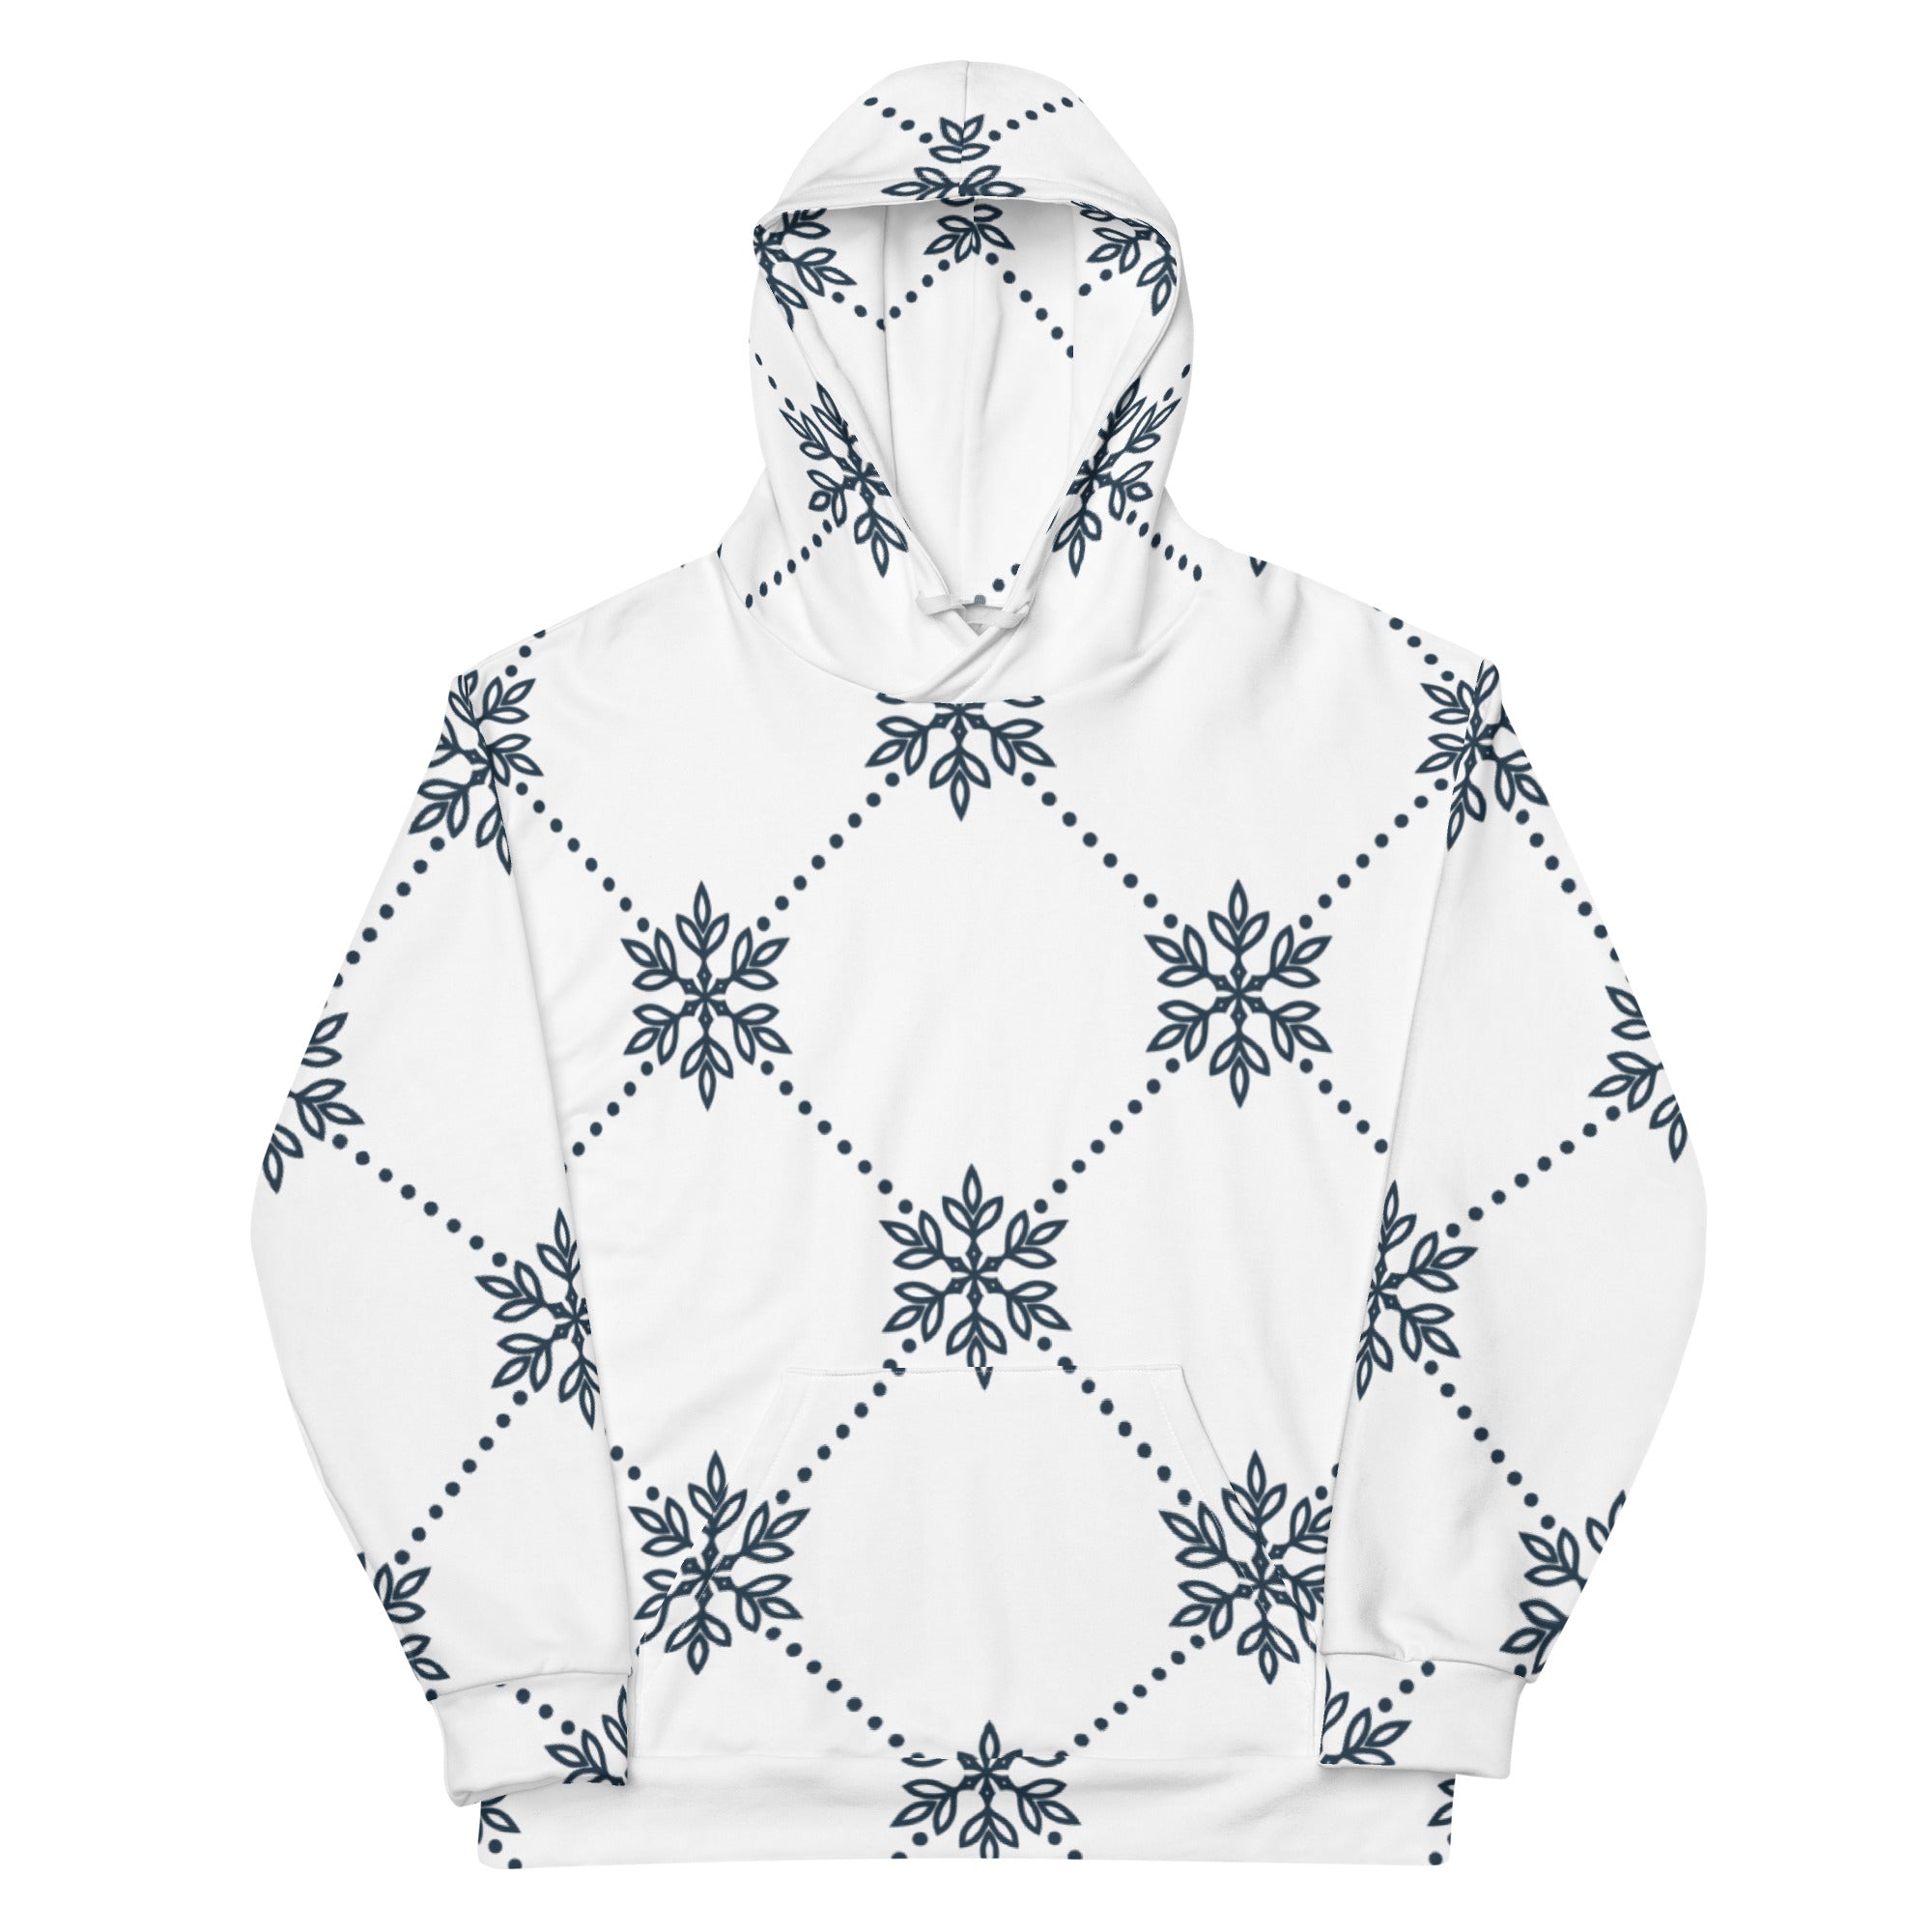 Unisex All-Over Print Hoodie - Black Damask Snowflake Pattern - GRAPHIC T-SHIRTS